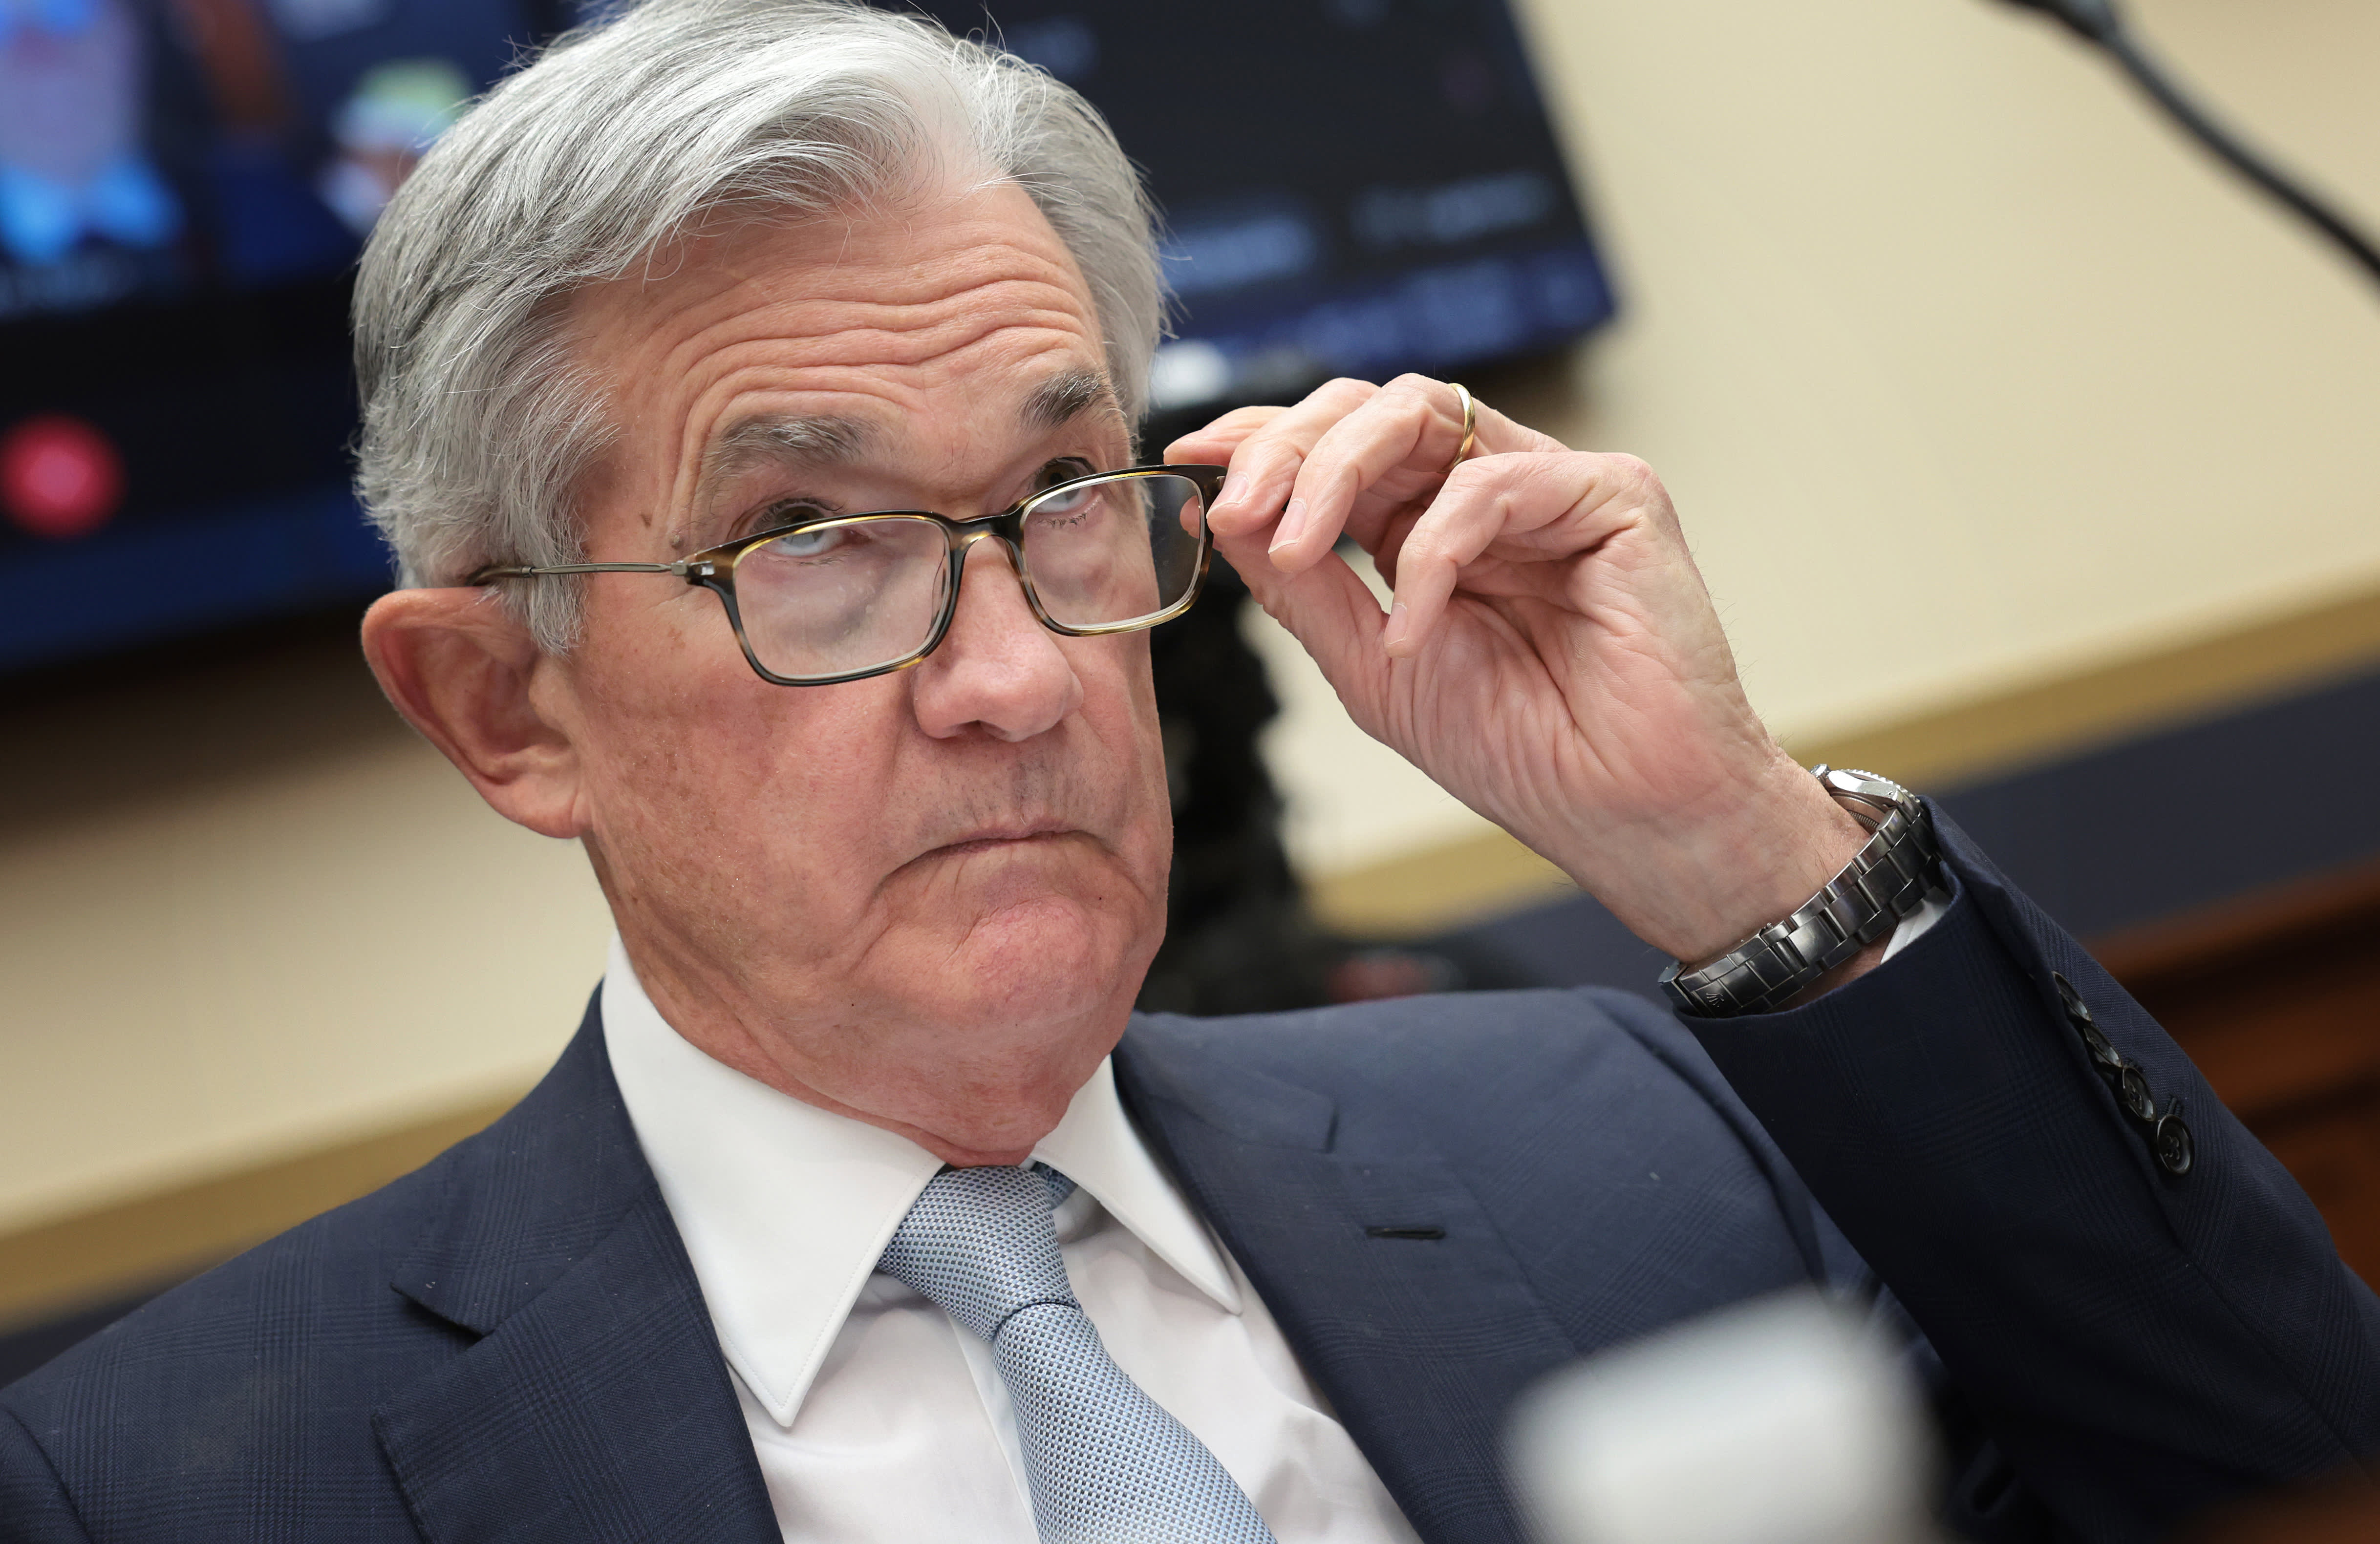 Fed Chair Powell notes ‘highly uncertain’ Ukraine impact, but says rate hikes are still coming